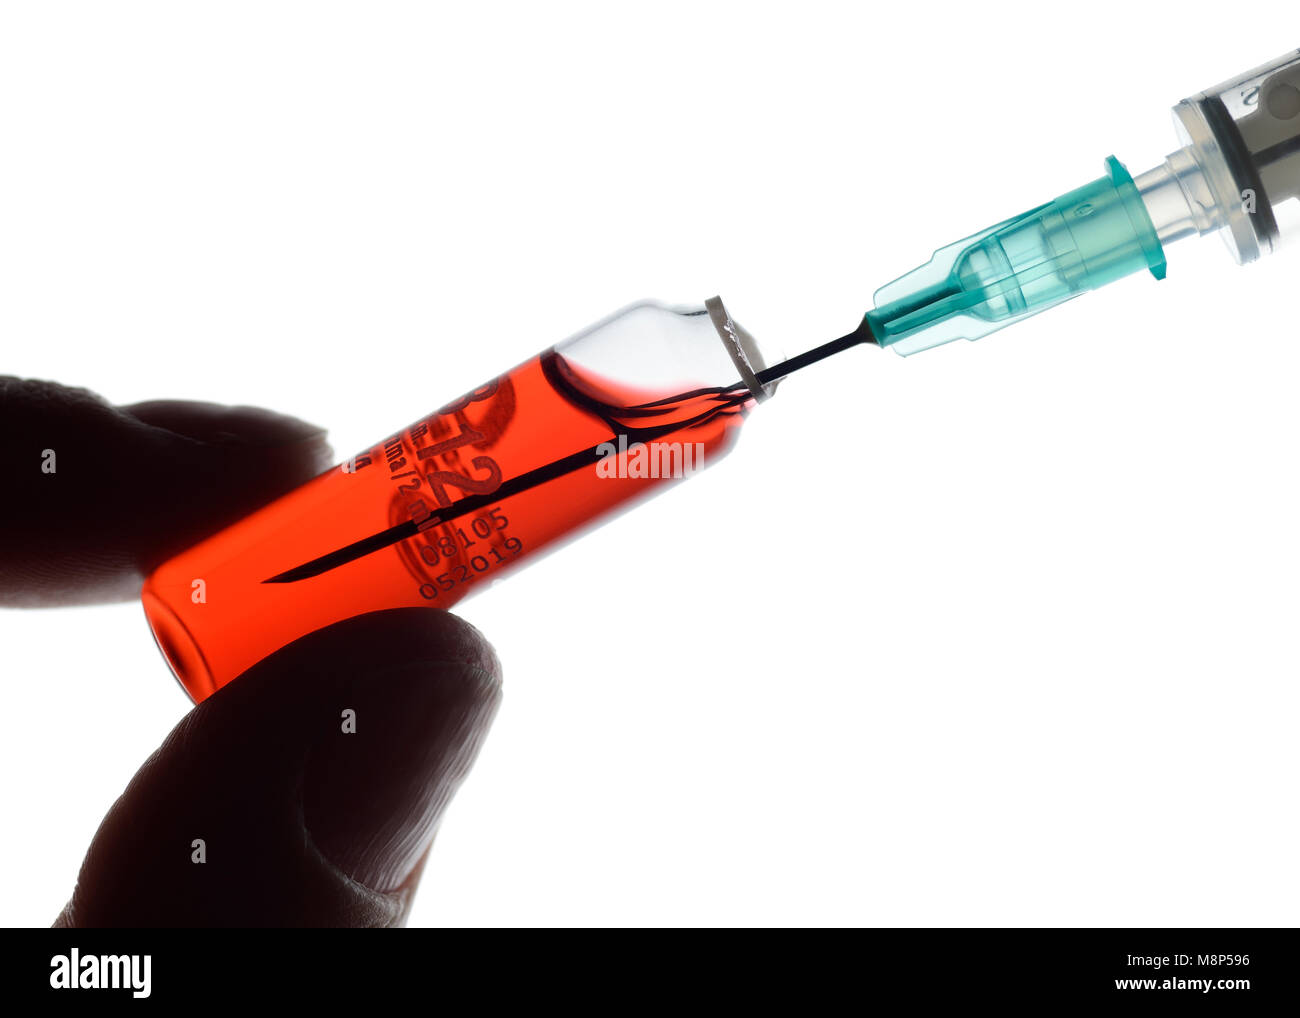 Vial and Syringe, Preparing for an Injection of Hydroxocobalamin, Close Up Stock Photo